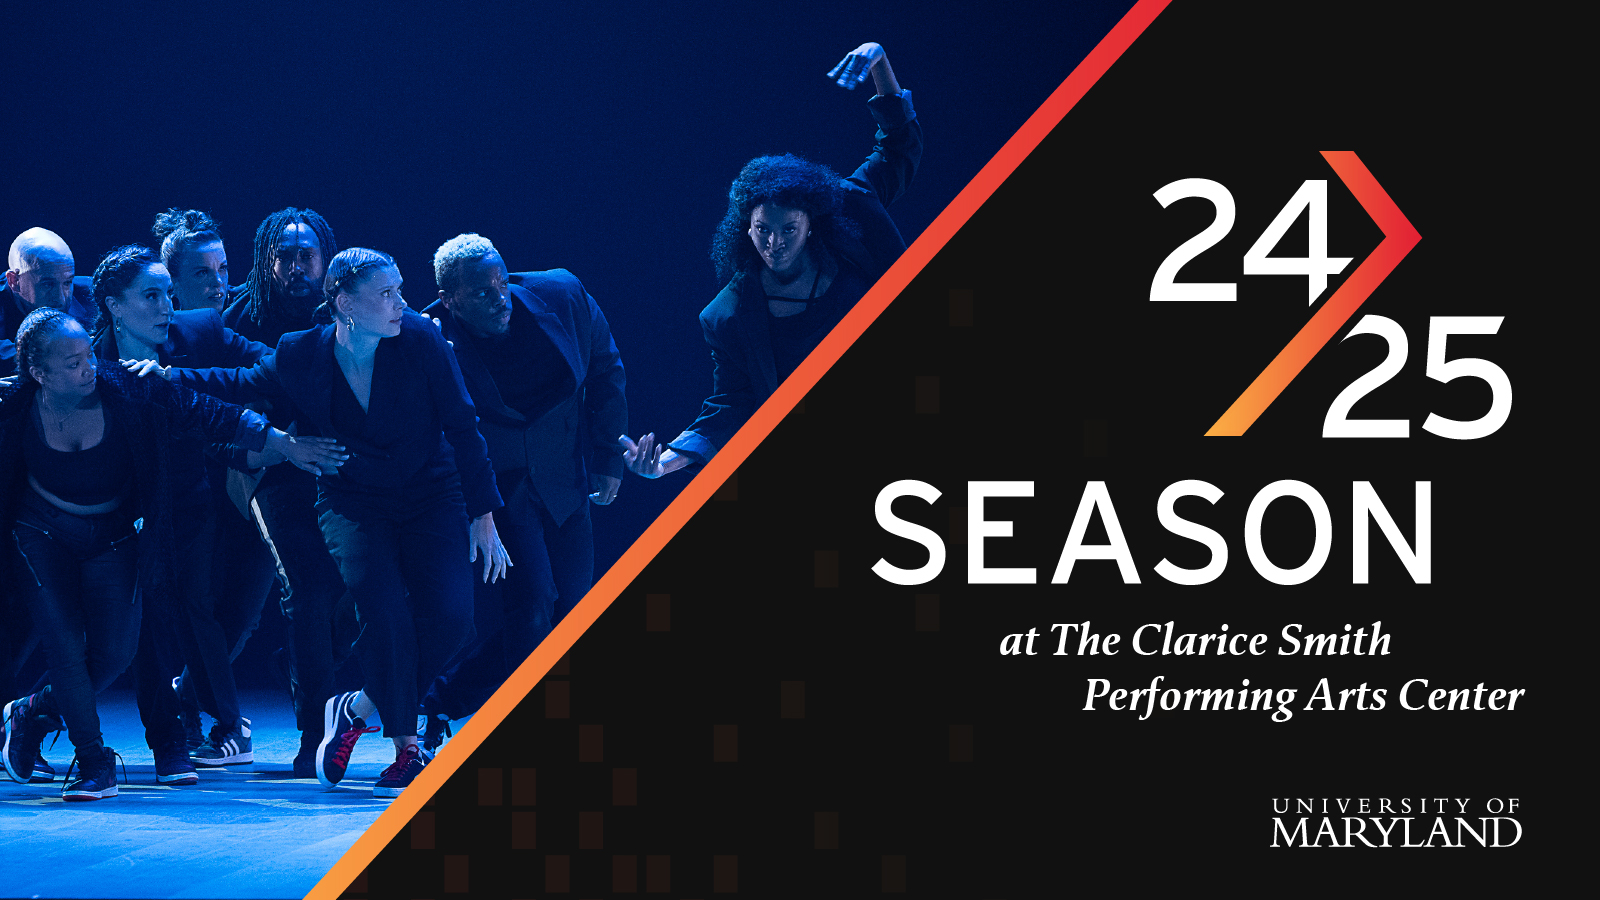 The performing arts at Maryland announce the 24-25 season.